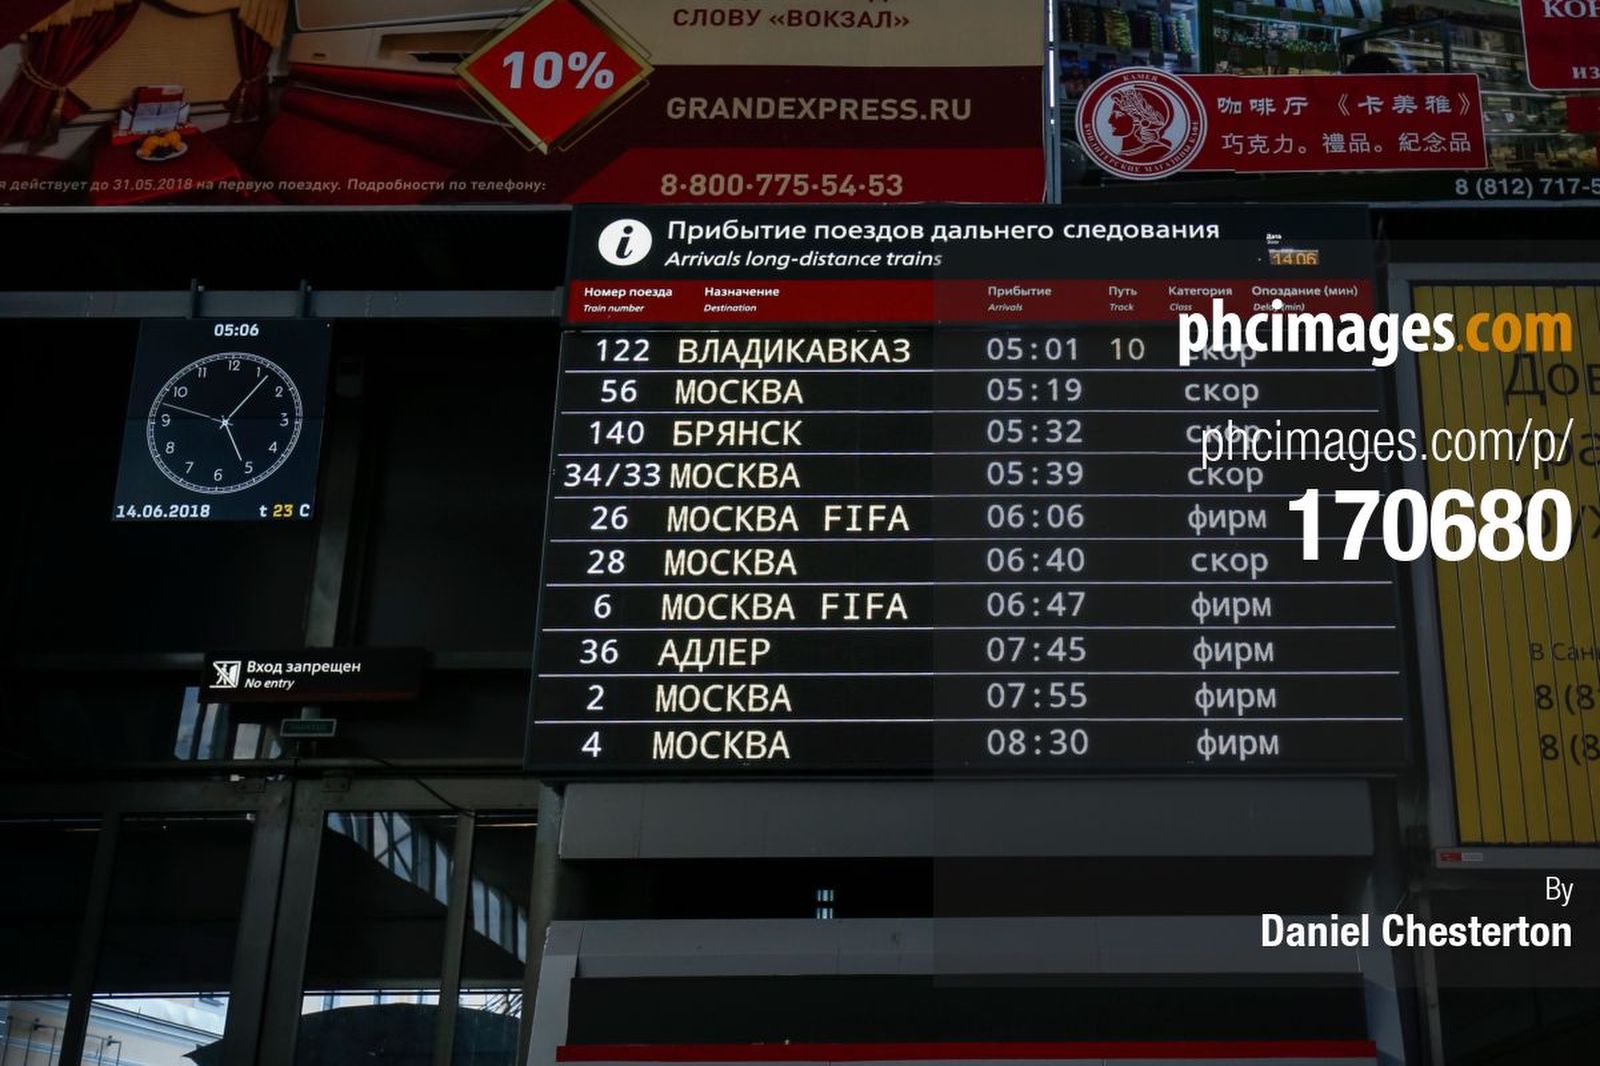 Free FIFA trains for fans are shown on the departures board